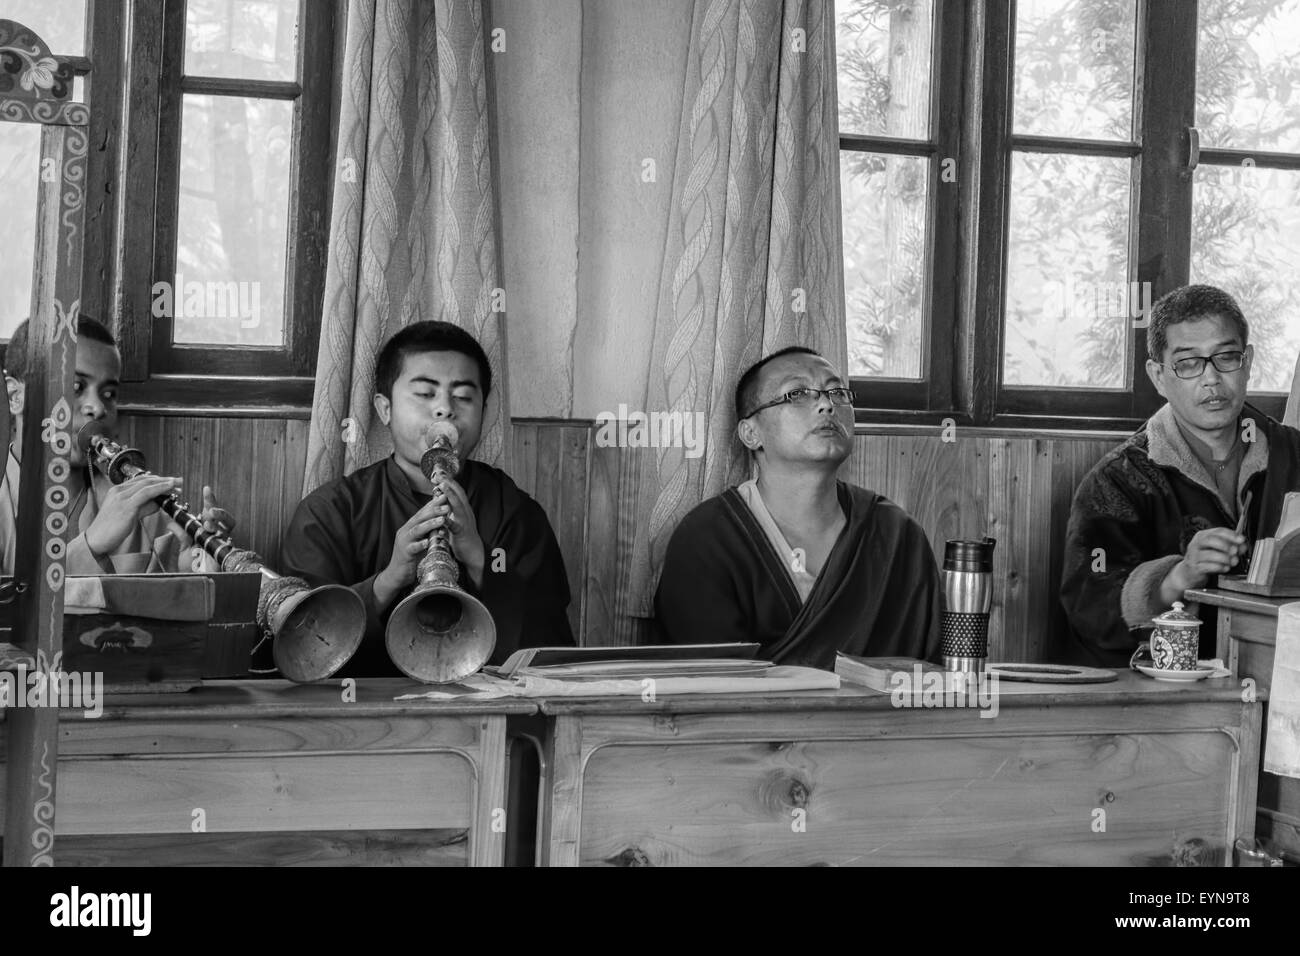 Buddhist priests, Lamas, praying inside a monastery in India, playing traditional flute, gong with copy space in black and white Stock Photo